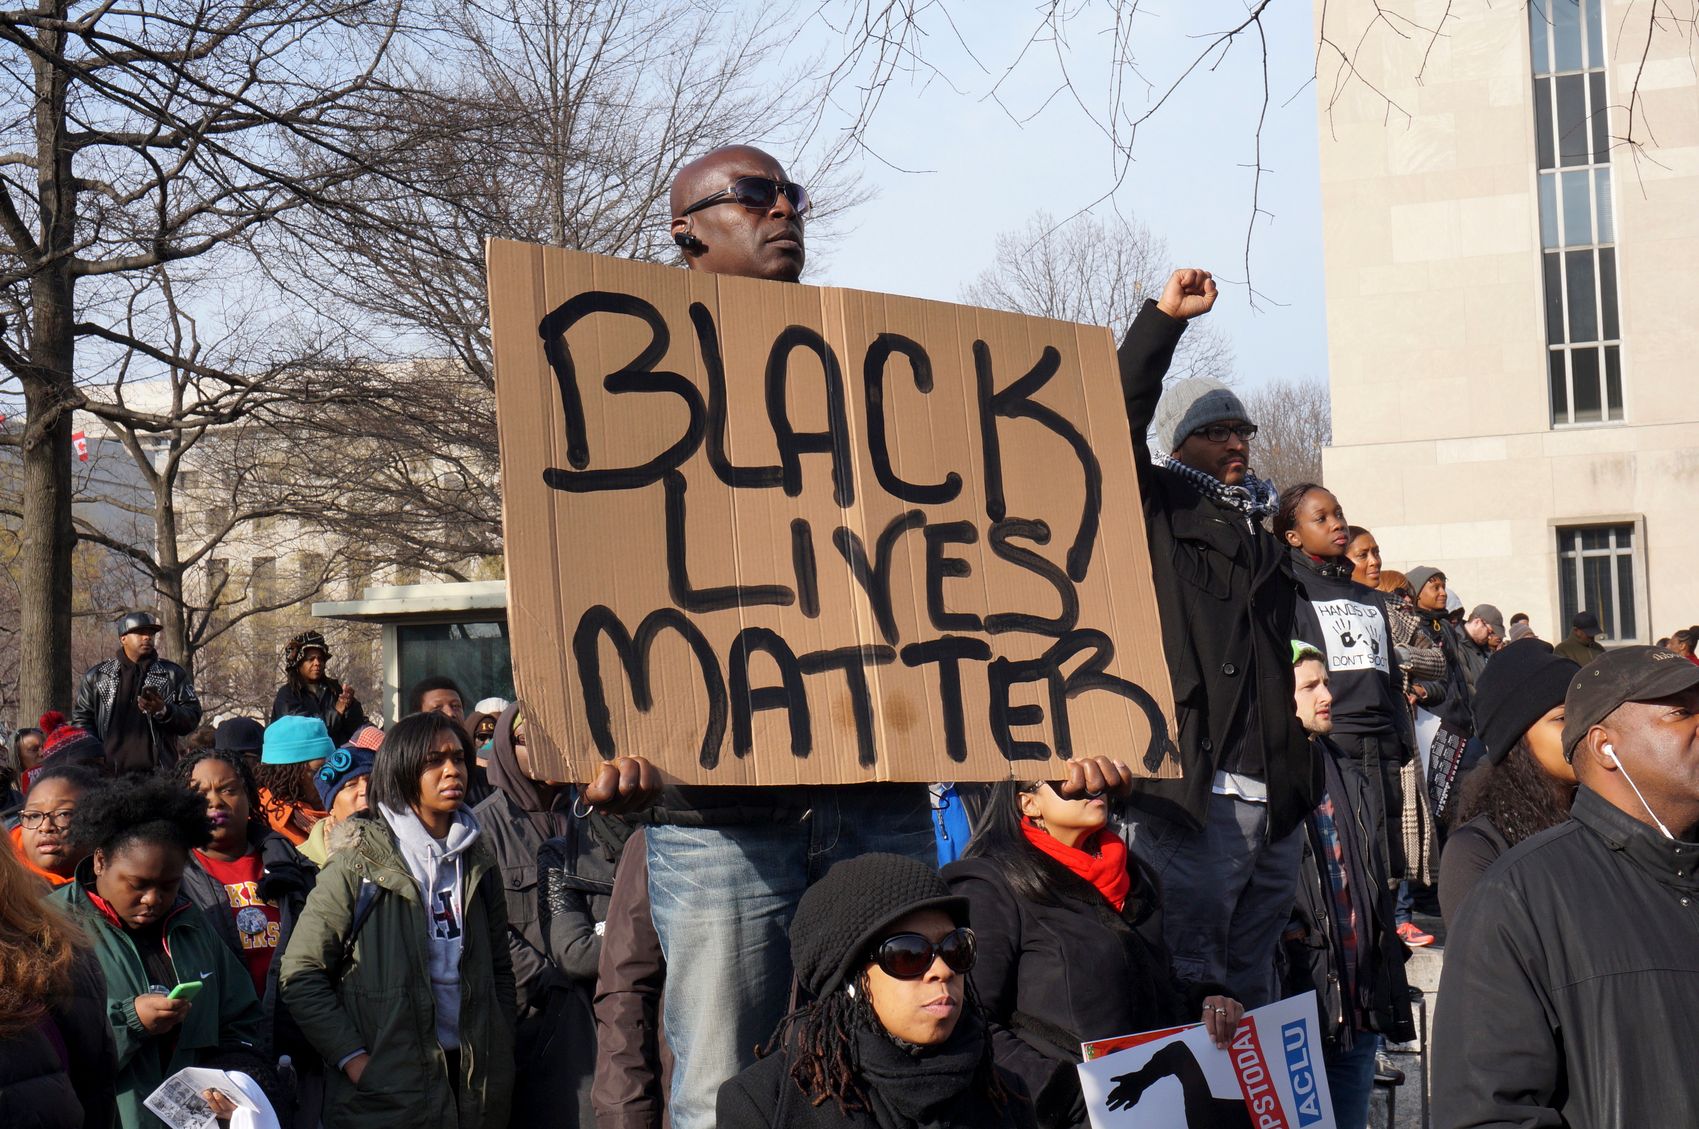 Washington DC, USA-December 13, 2014: This man is protesting police brutality at a protest led by Reverend Al Sharpton on Pennsylvania Avenue in Washington DC. He displays a sign with the message Black Lives Matter. Recently the deaths of Michael Brown, Eric Garner and Tamir Rice have upset the black community.